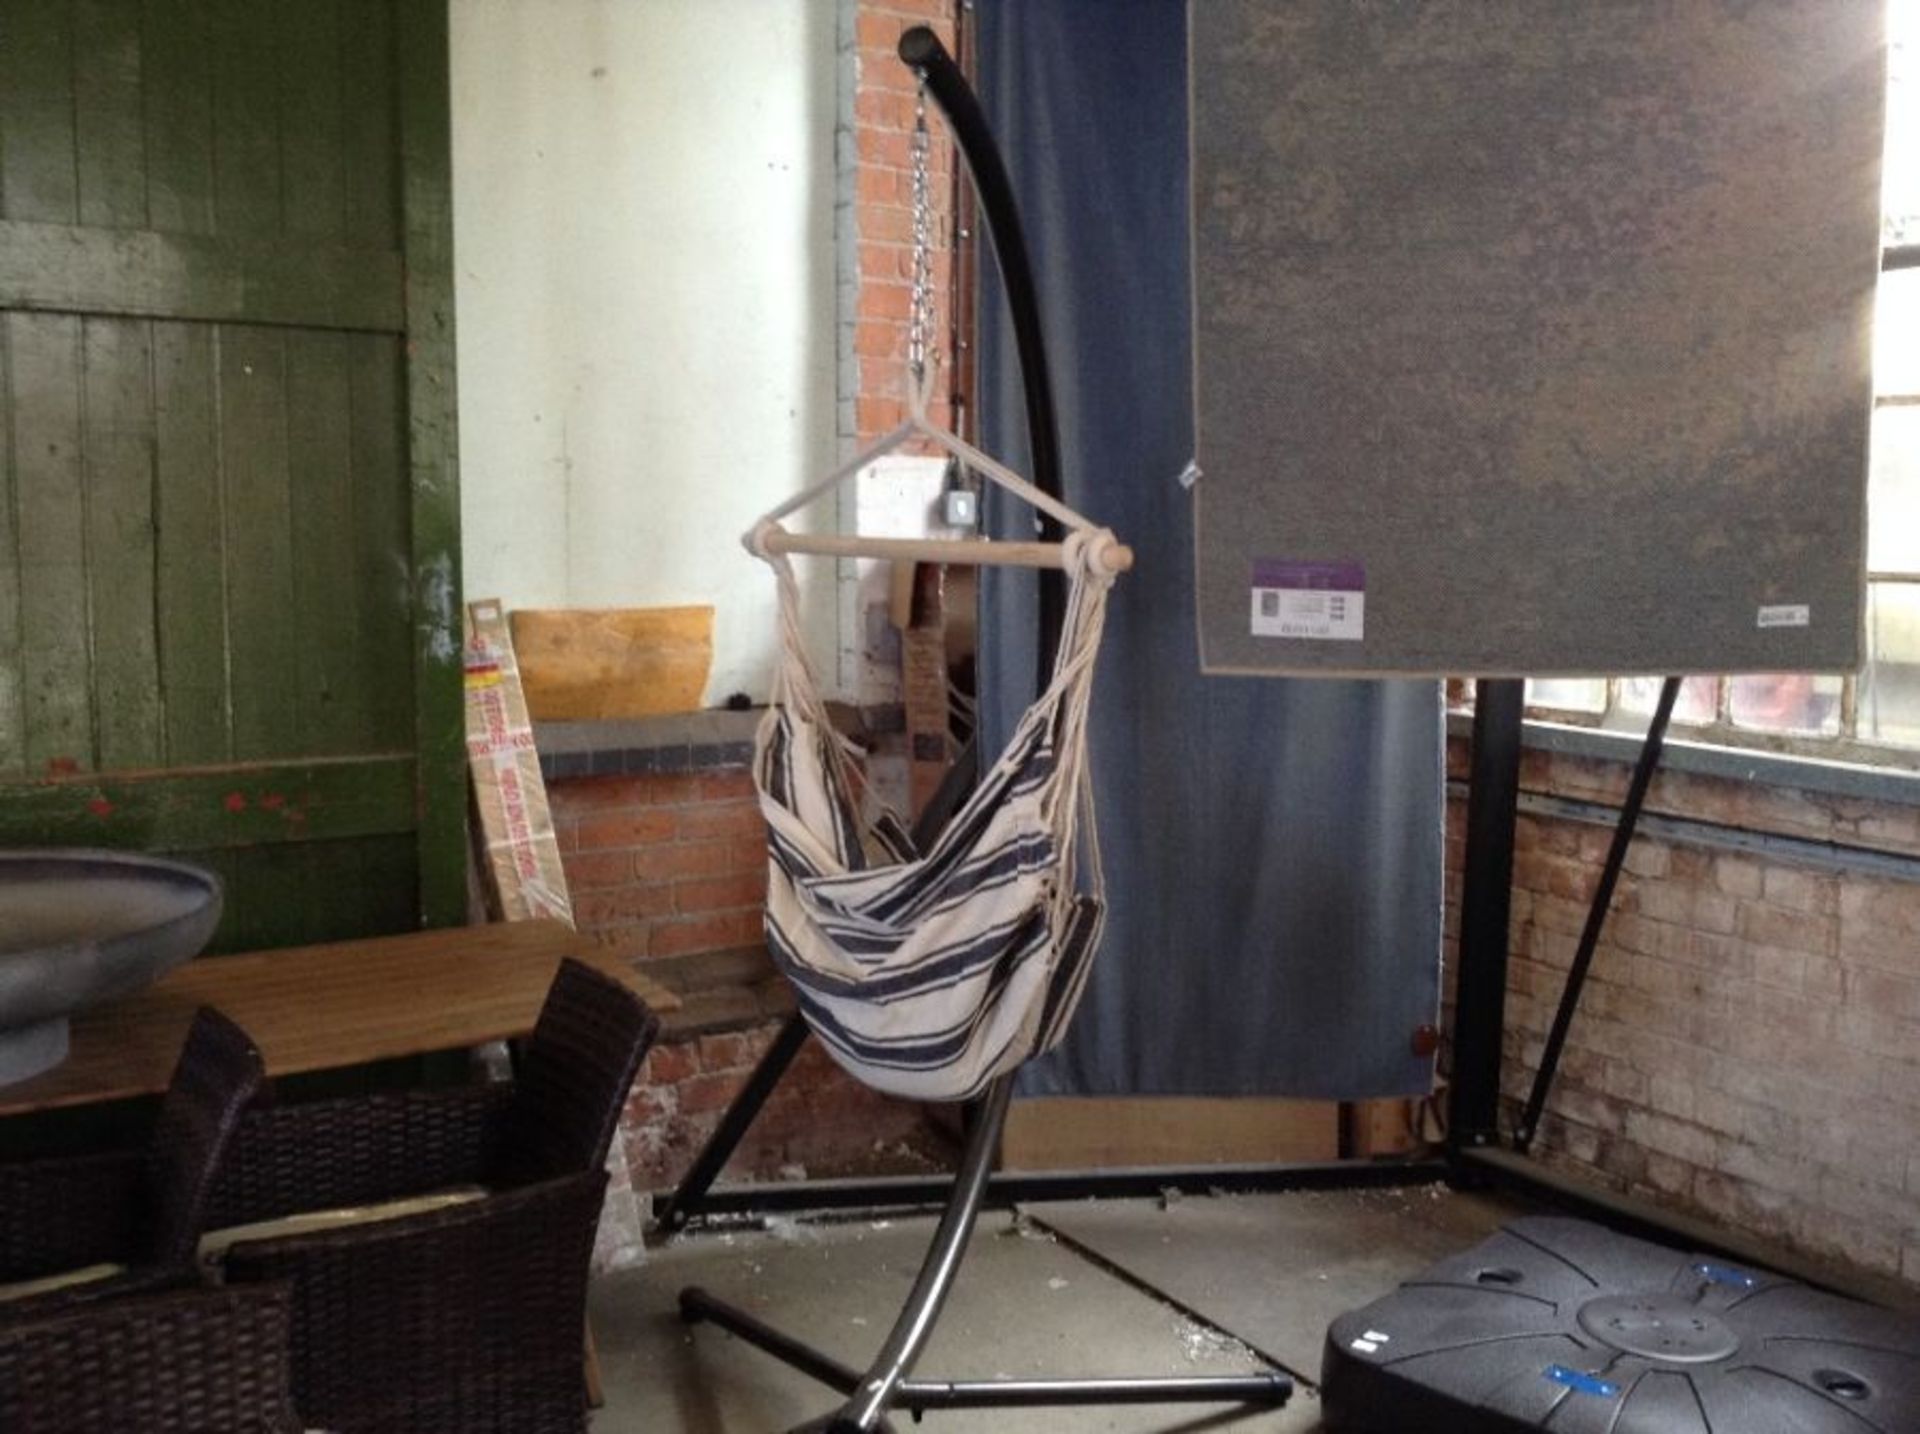 HANGING CHAIR WITH STAND (23648-8) - Image 2 of 2